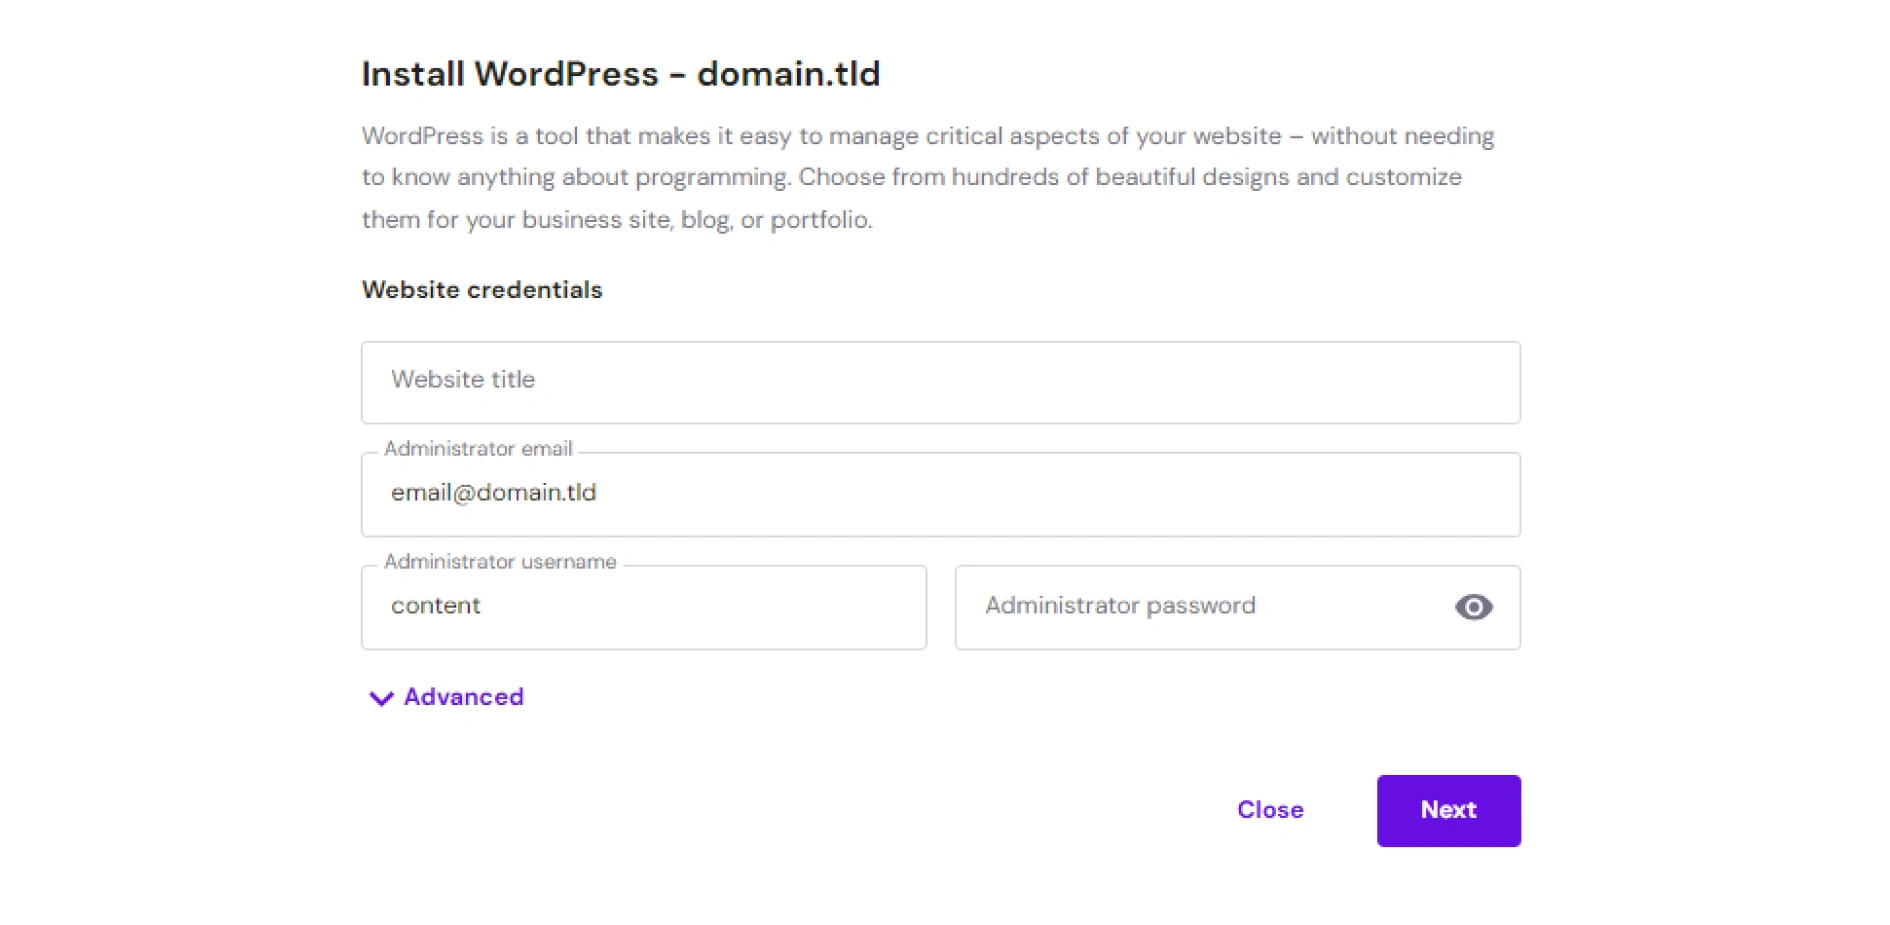 WordPress signup form. Enter your email, username, and password to create an account.